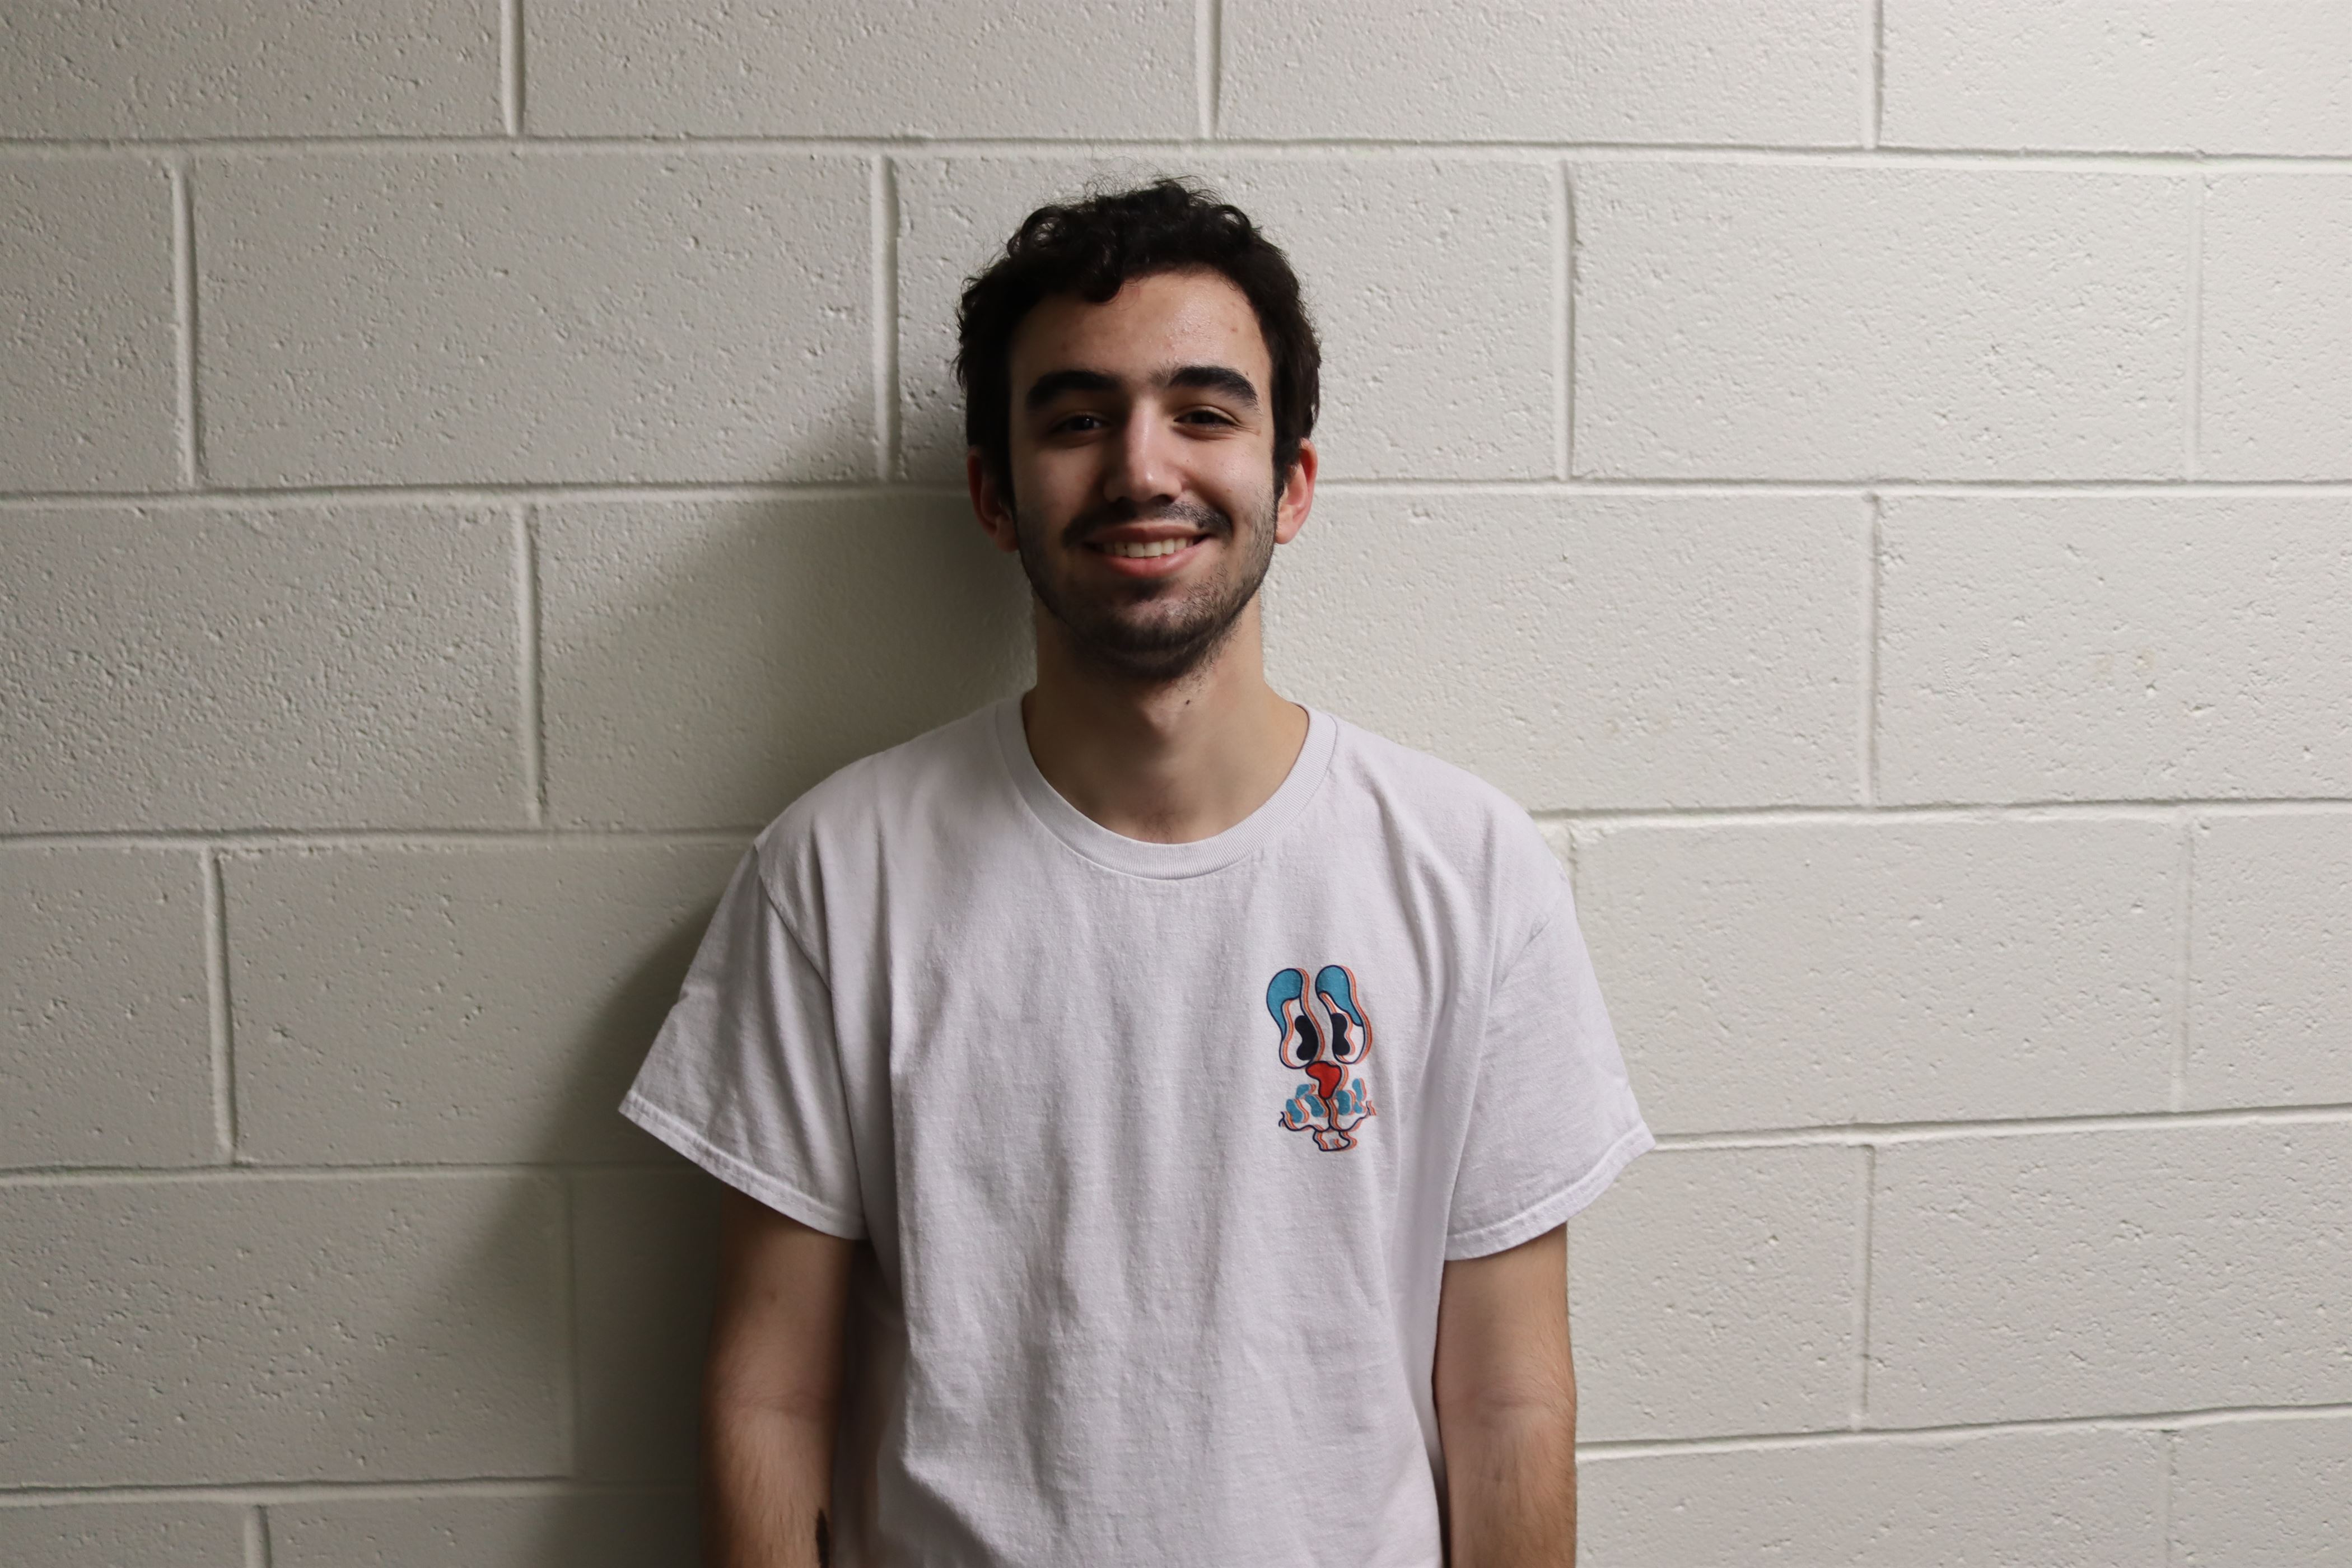 Nicholas Vidal, a freshman visual communications and design major, felt the event was a once-in-a-lifetime opportunity.